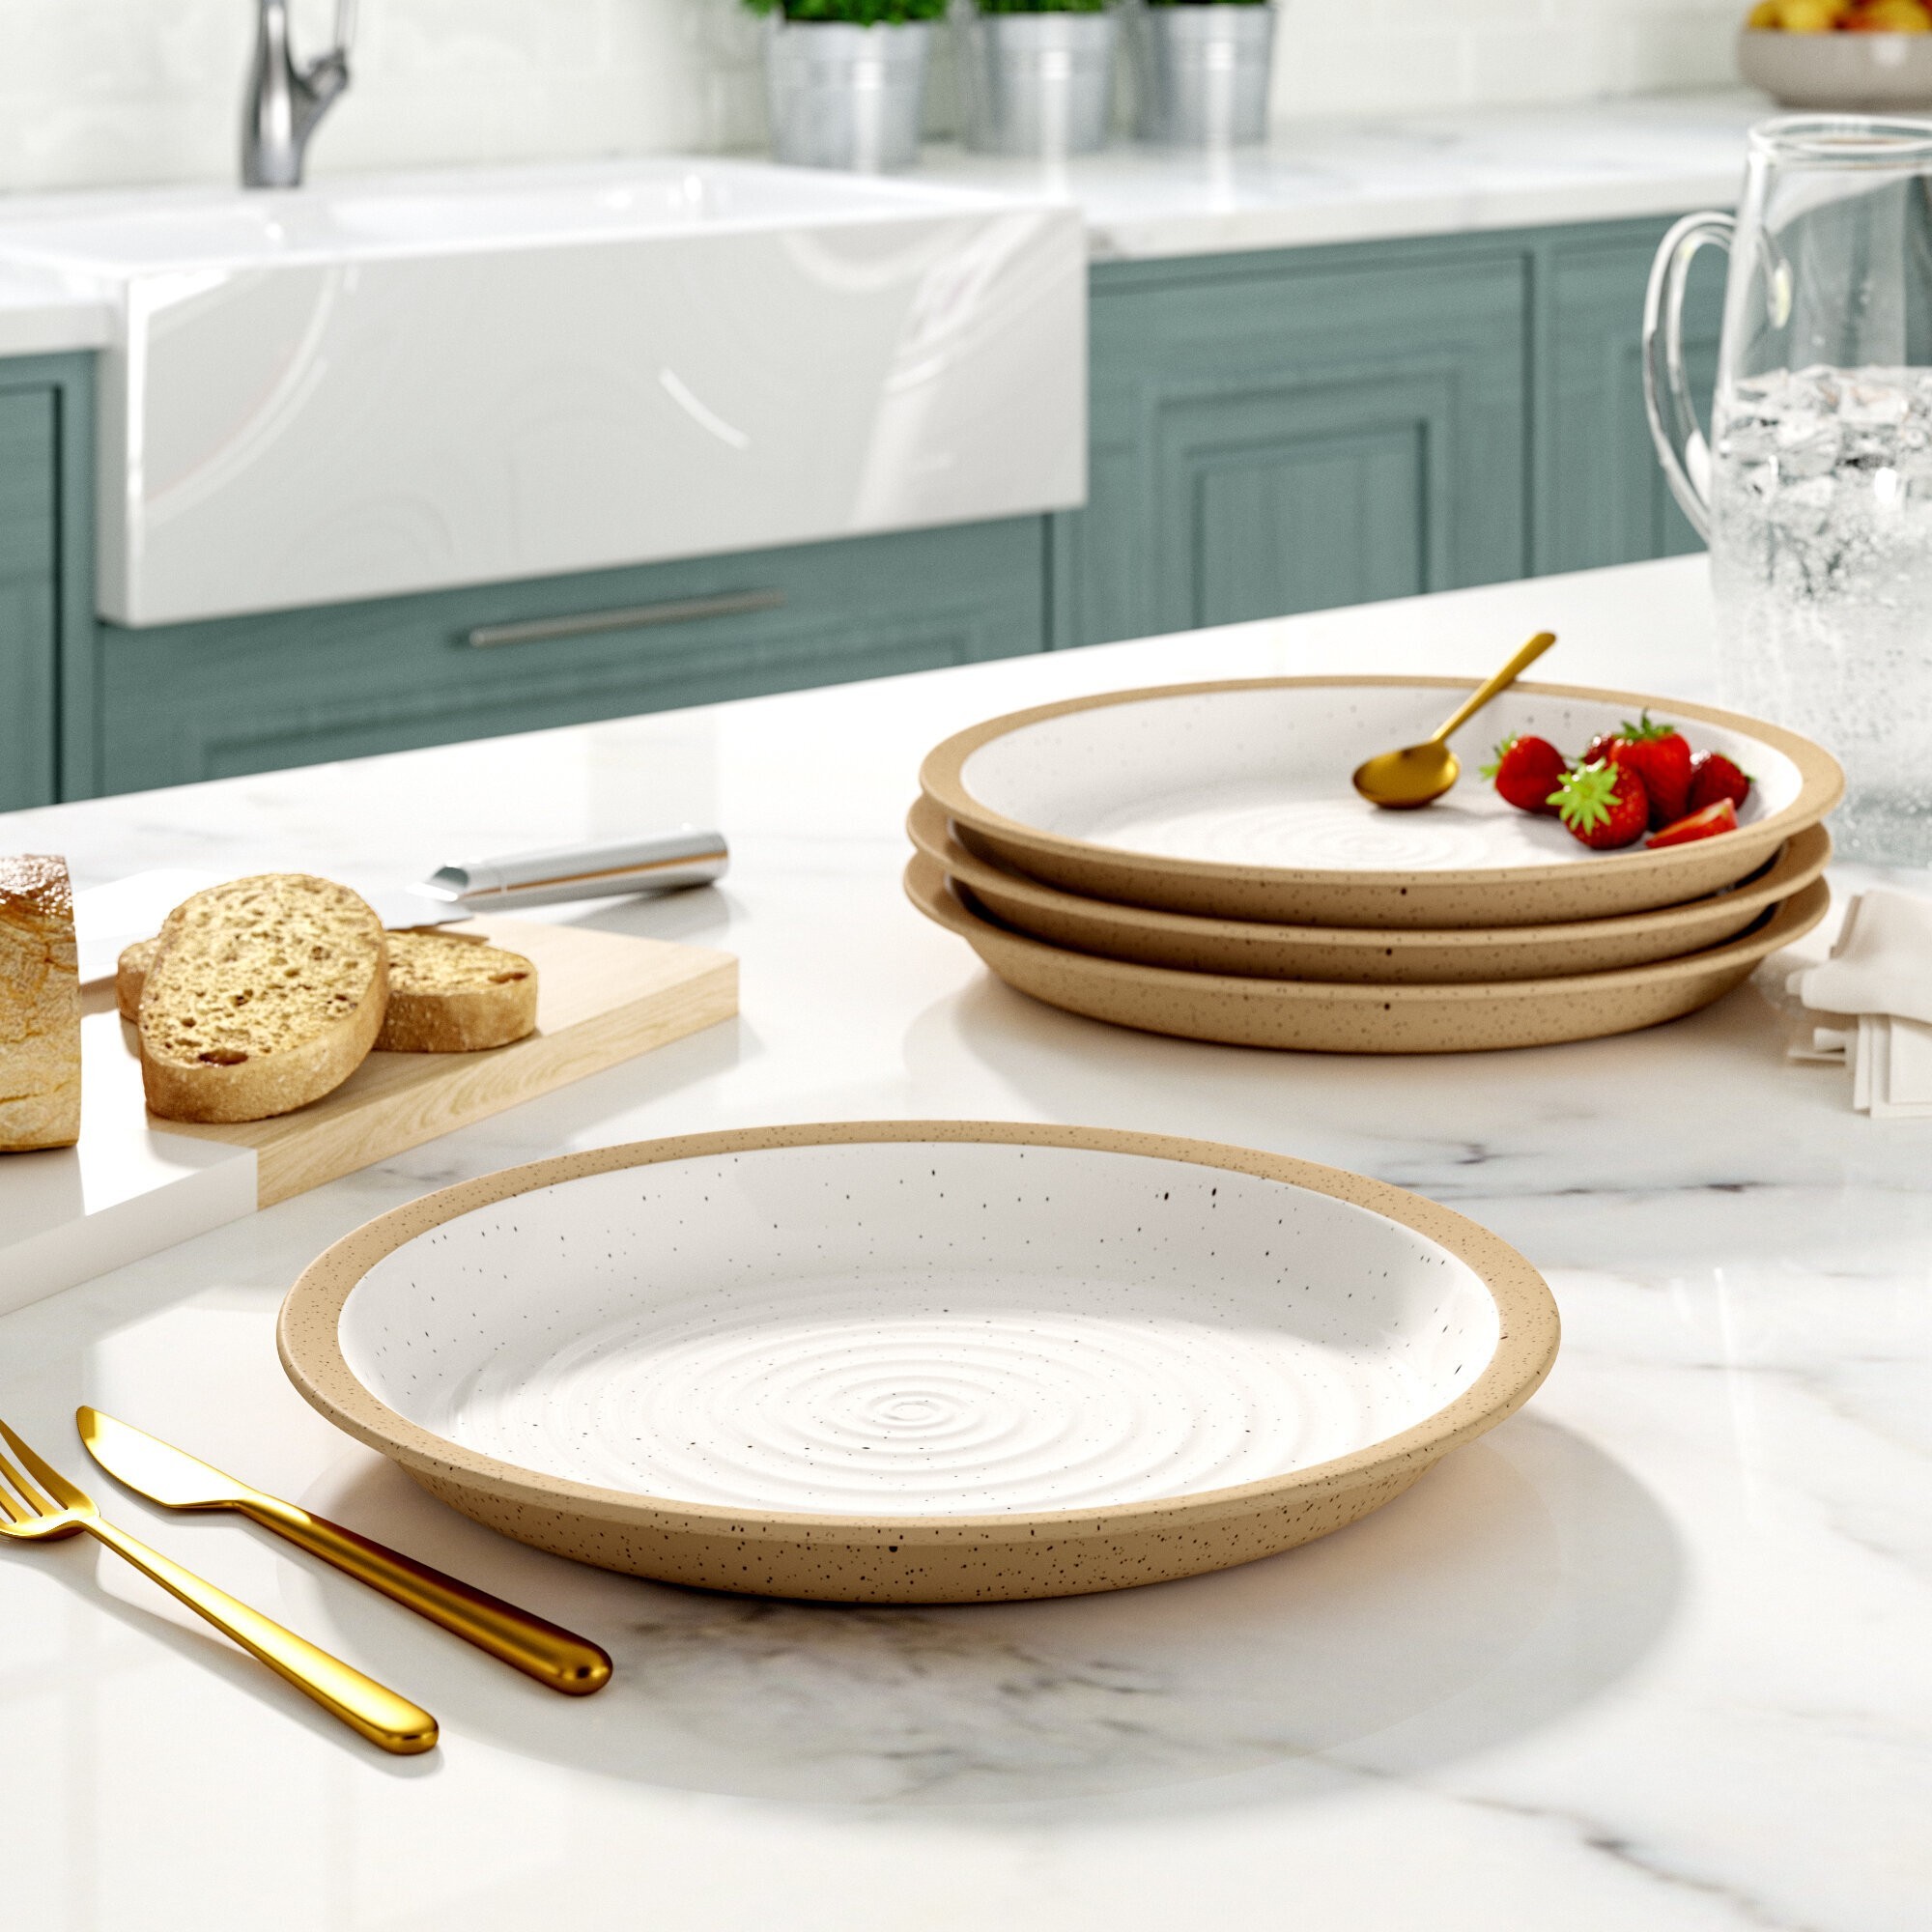 How to Choose Dinner Plates - Foter